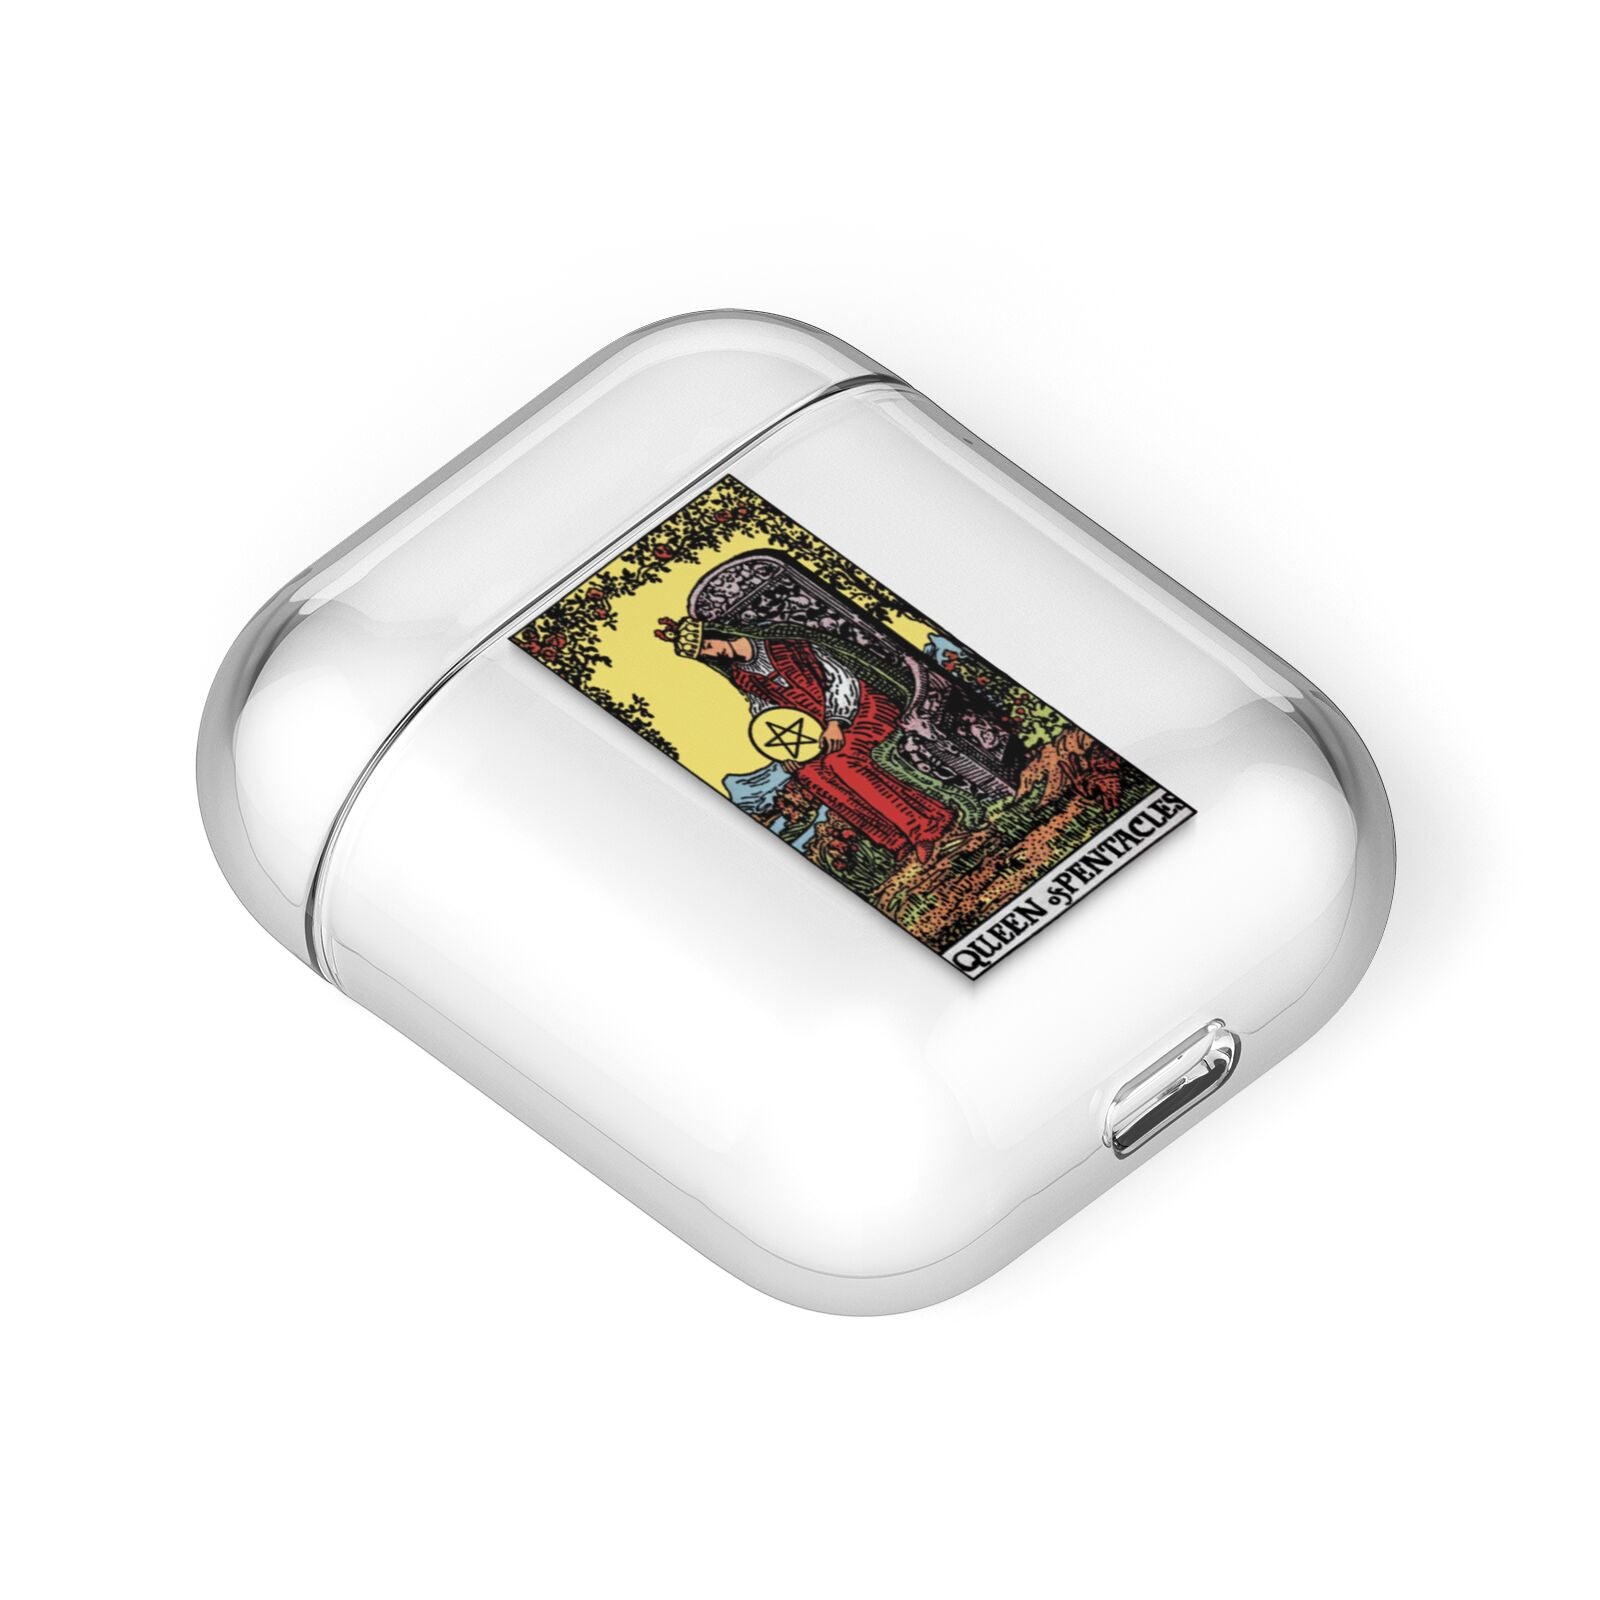 Queen of Pentacles Tarot Card AirPods Case Laid Flat